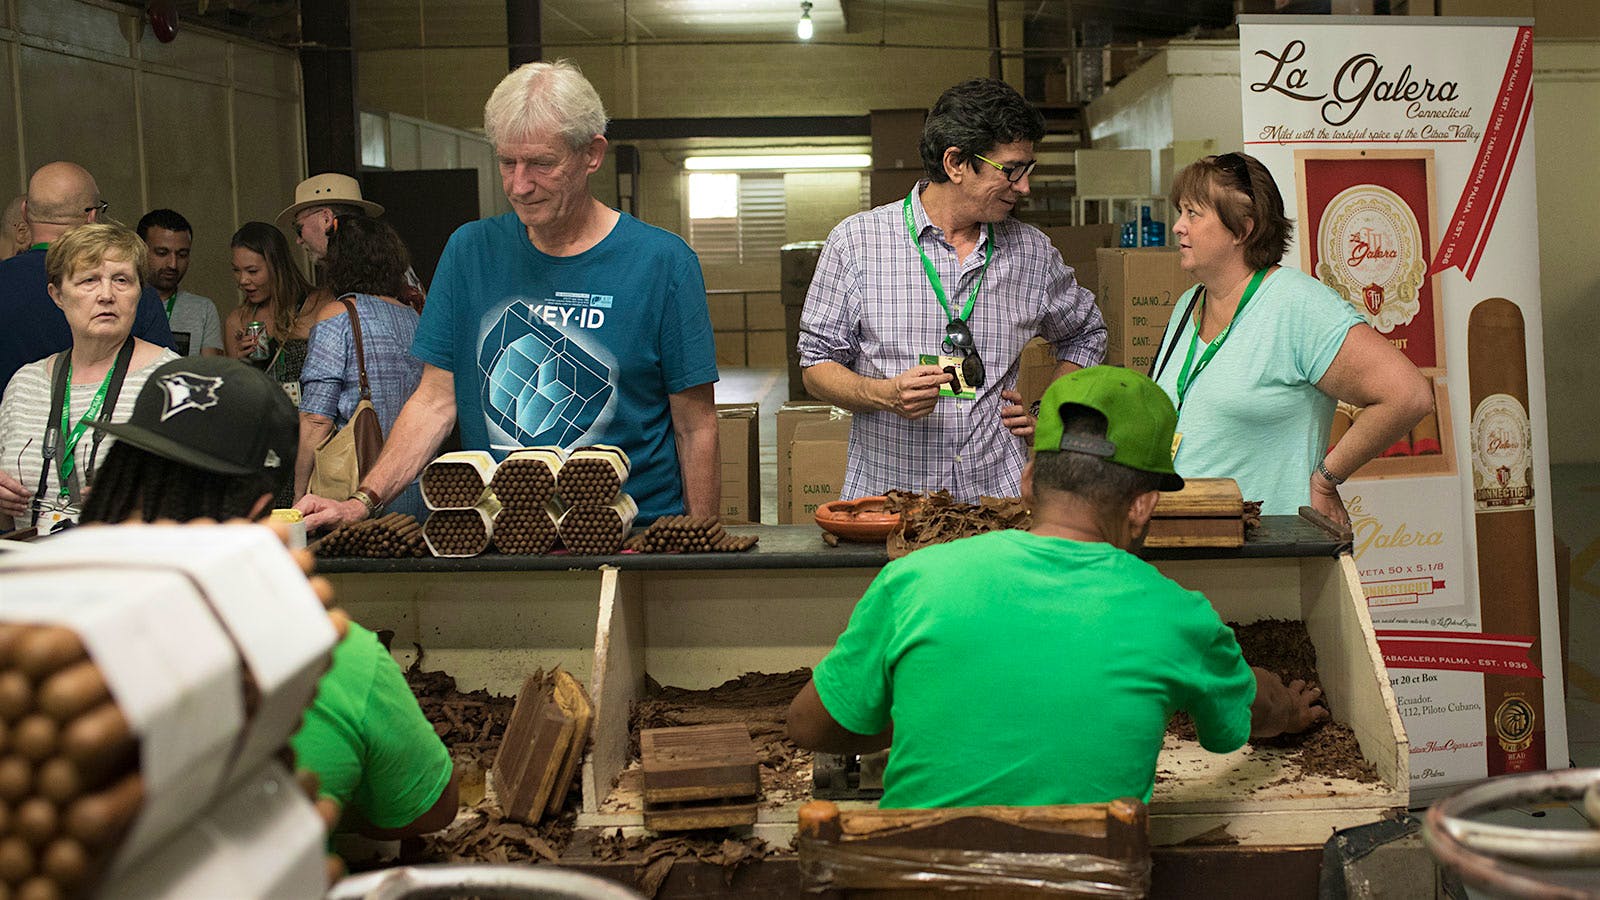 Guests visit the La Galera cigar factory in the Dominican Republic during last year's ProCigar Festival.